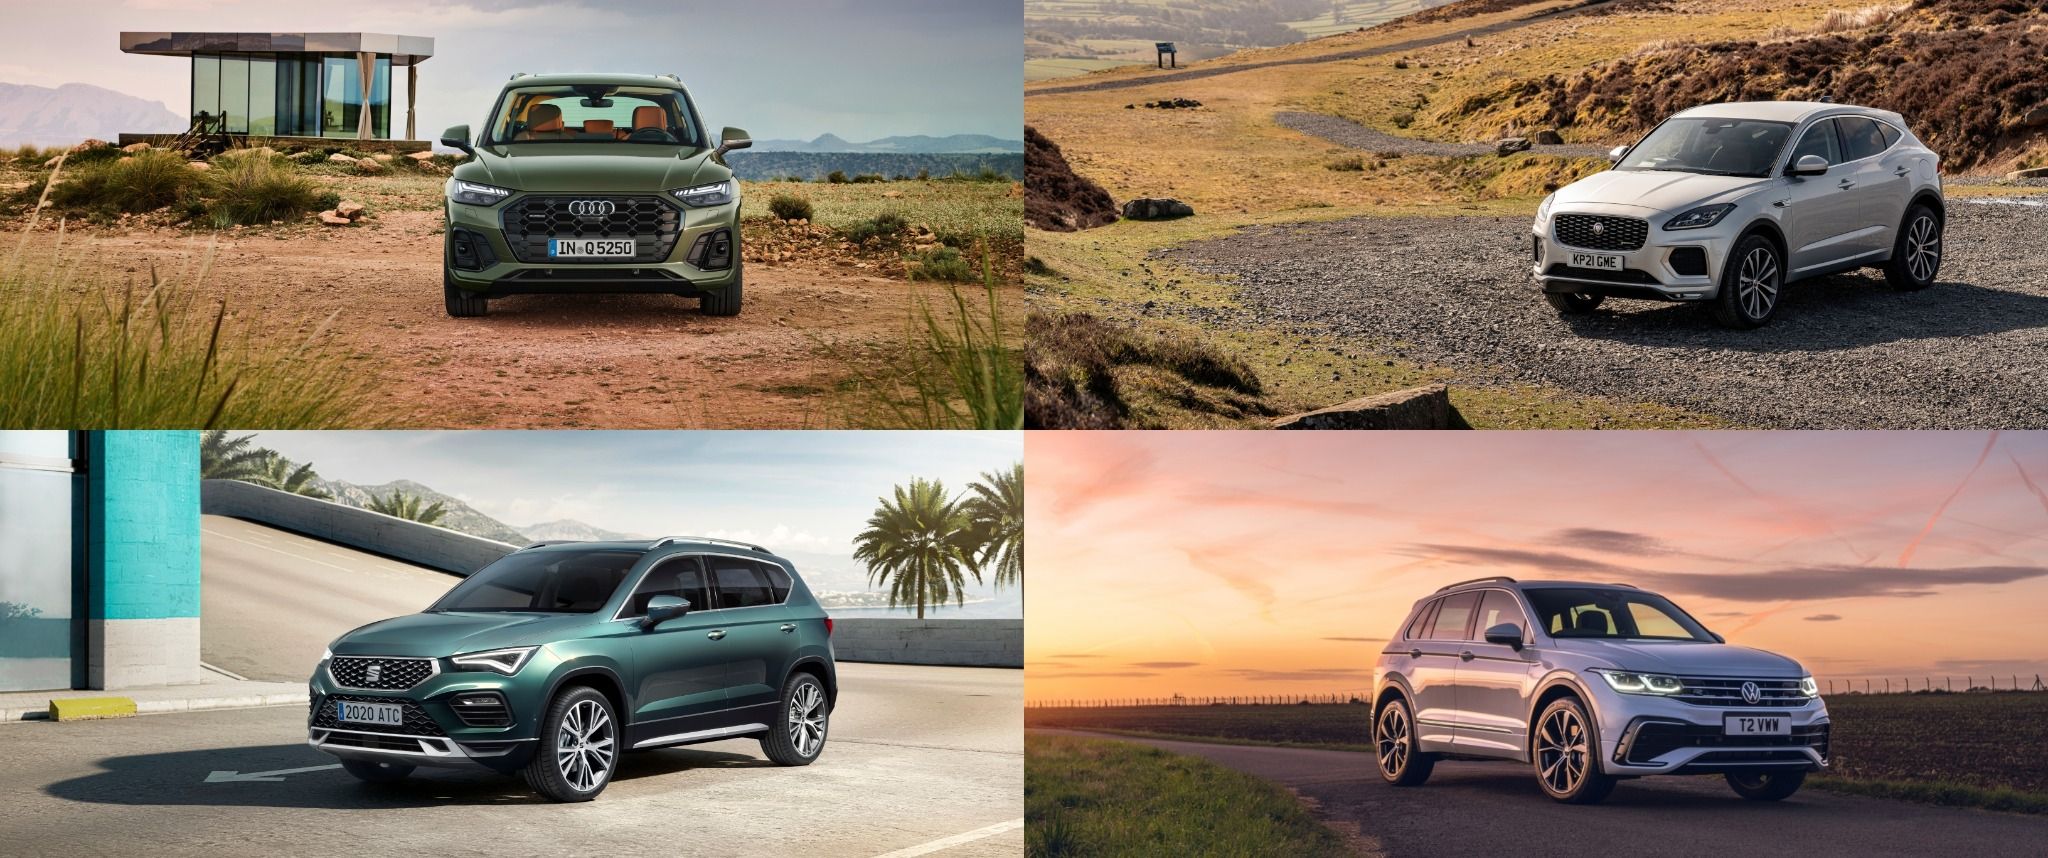 What's the best mid-size SUV?